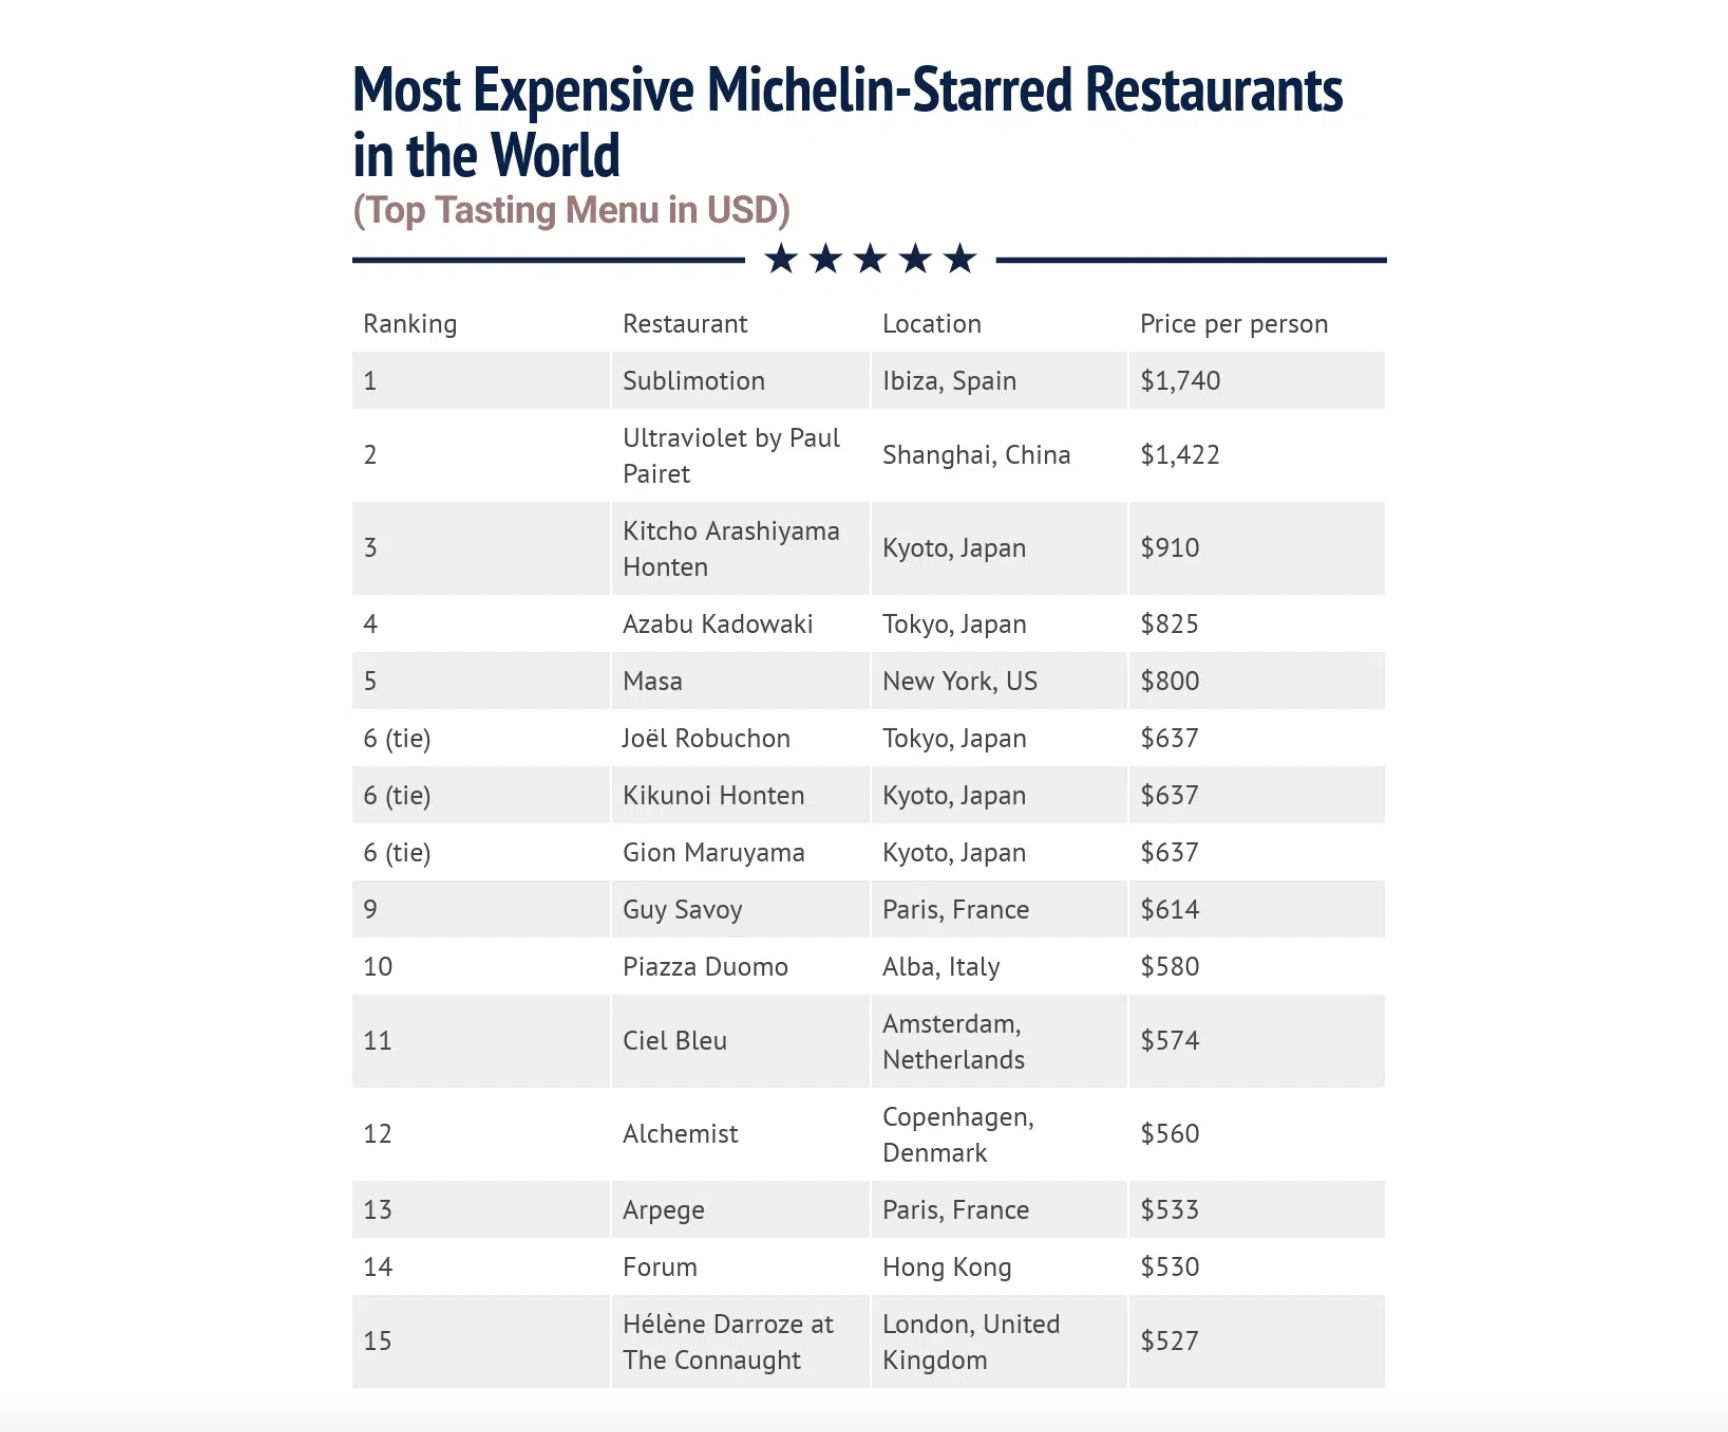 The most expensive Michelin-starred restaurants in the world 